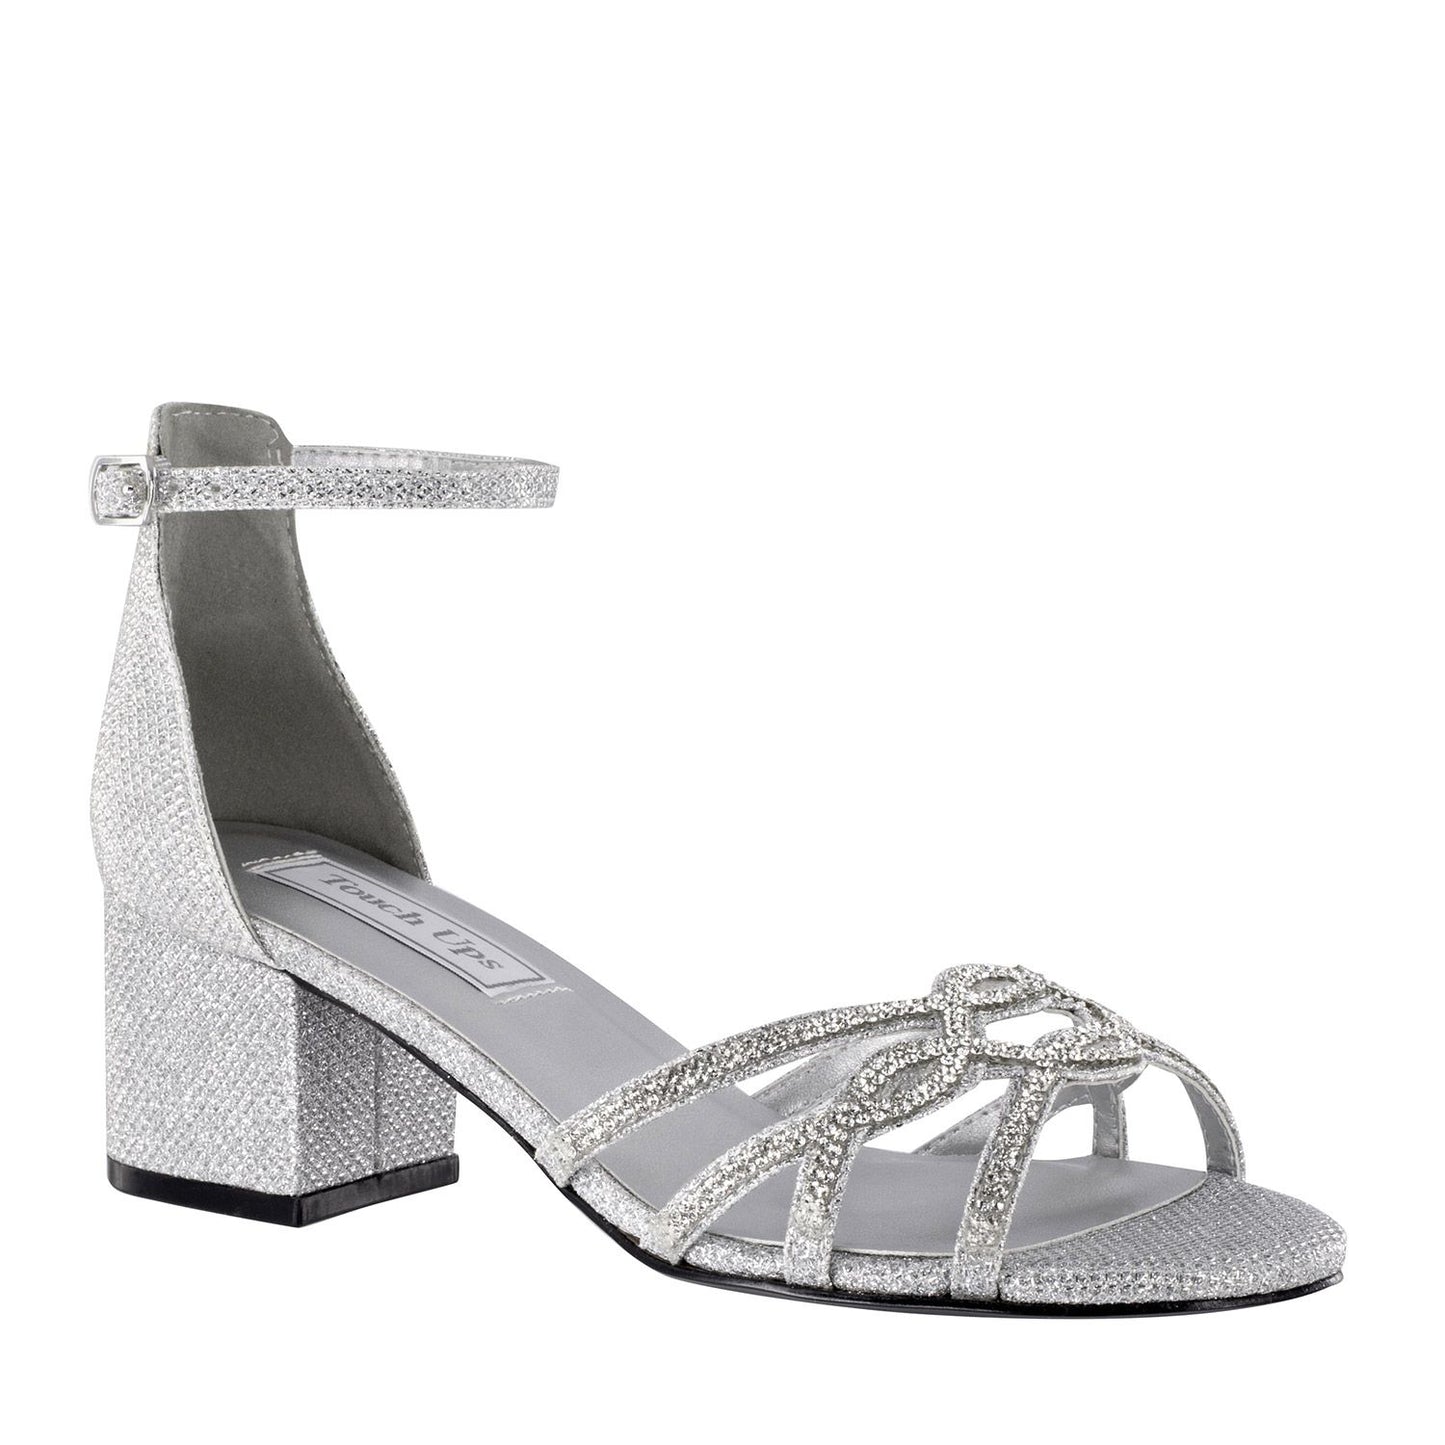 Silver  shimmer shoe with 1.75 inch block heel.